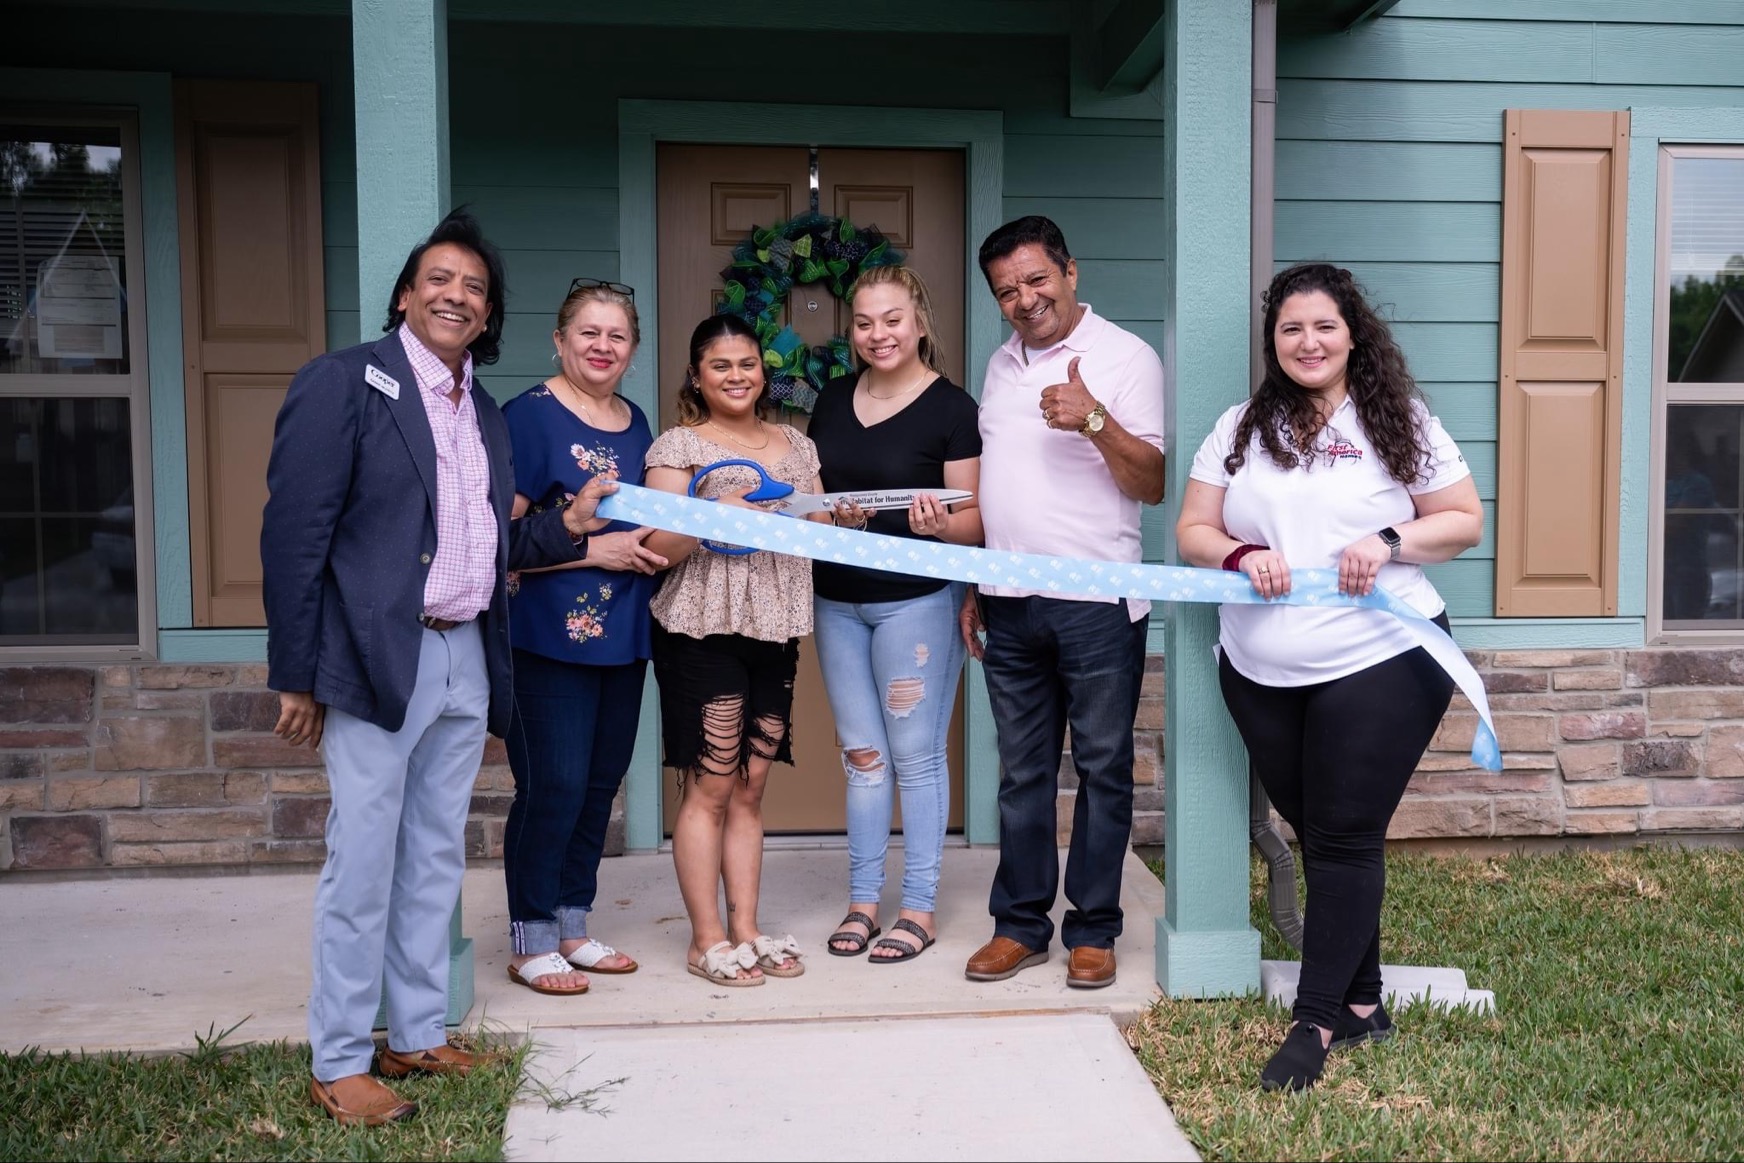 CONROE TX, Habitat for Humanity of Montgomery County held a ribbon cutting ceremony to dedicate a new home to a deserving family Saturday. First America Homes donated labor and sponsored the construction of them new home in Conroe. 